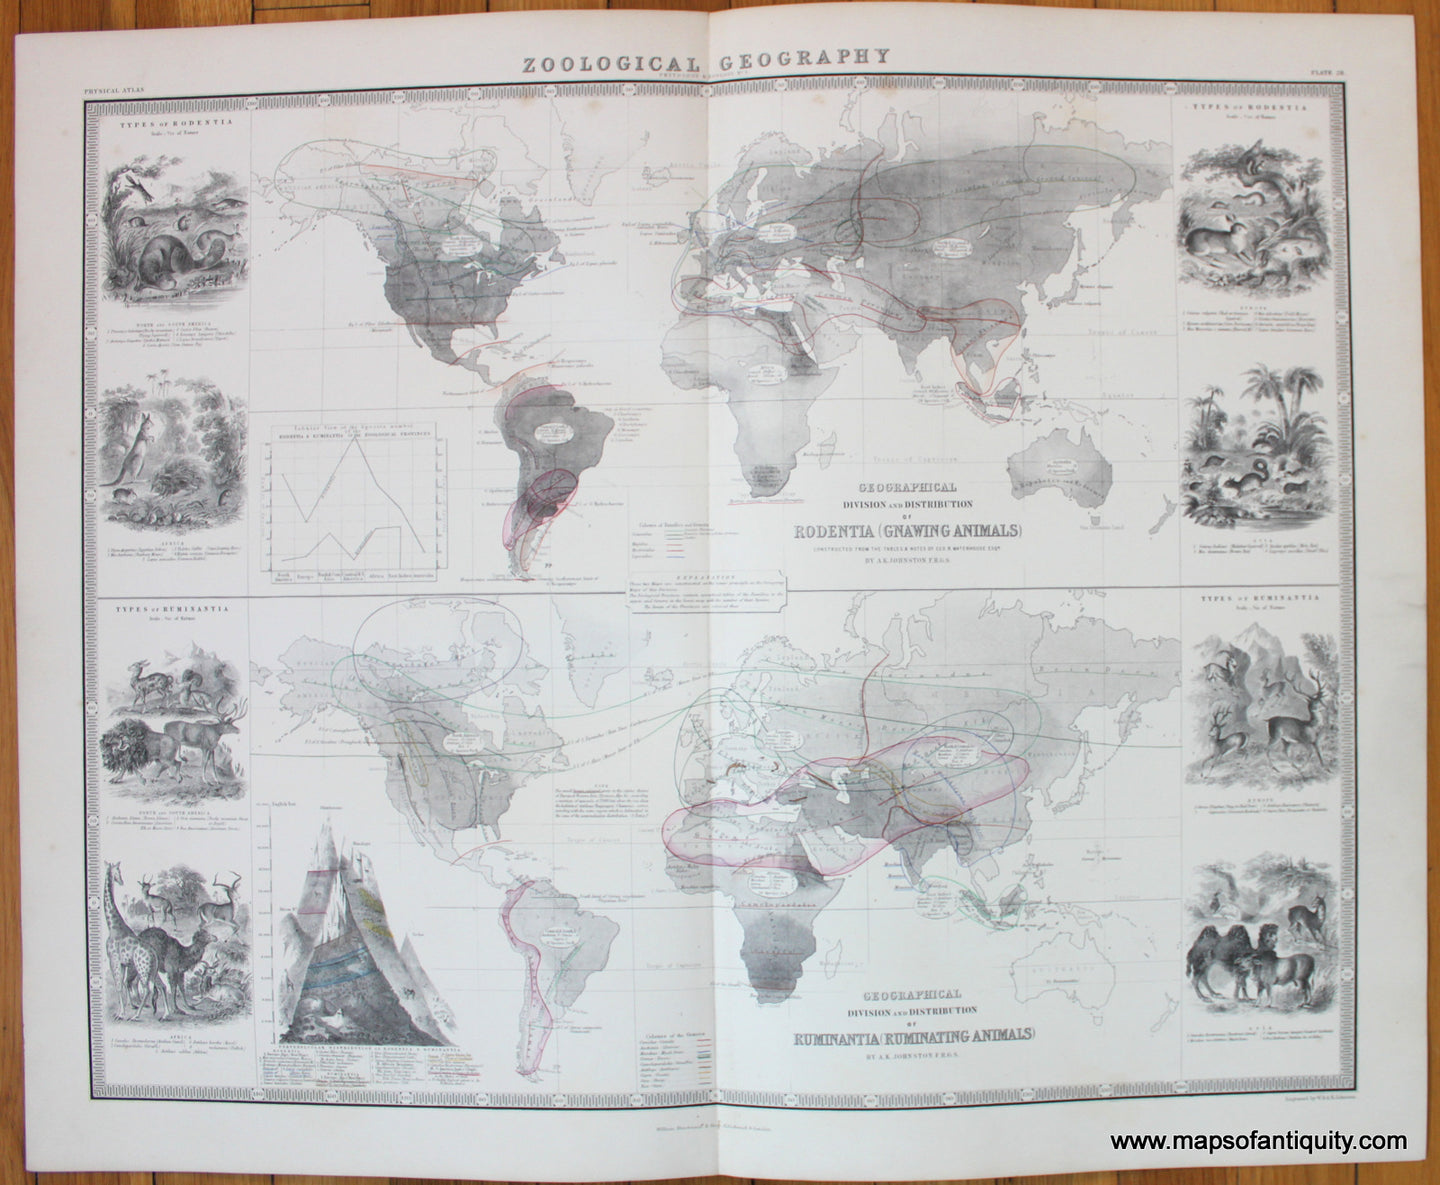 Geographical-Distribution-of-Rodentia-and-Ruminantia-Johnston-1856-Antique-Map-1850s-1800s